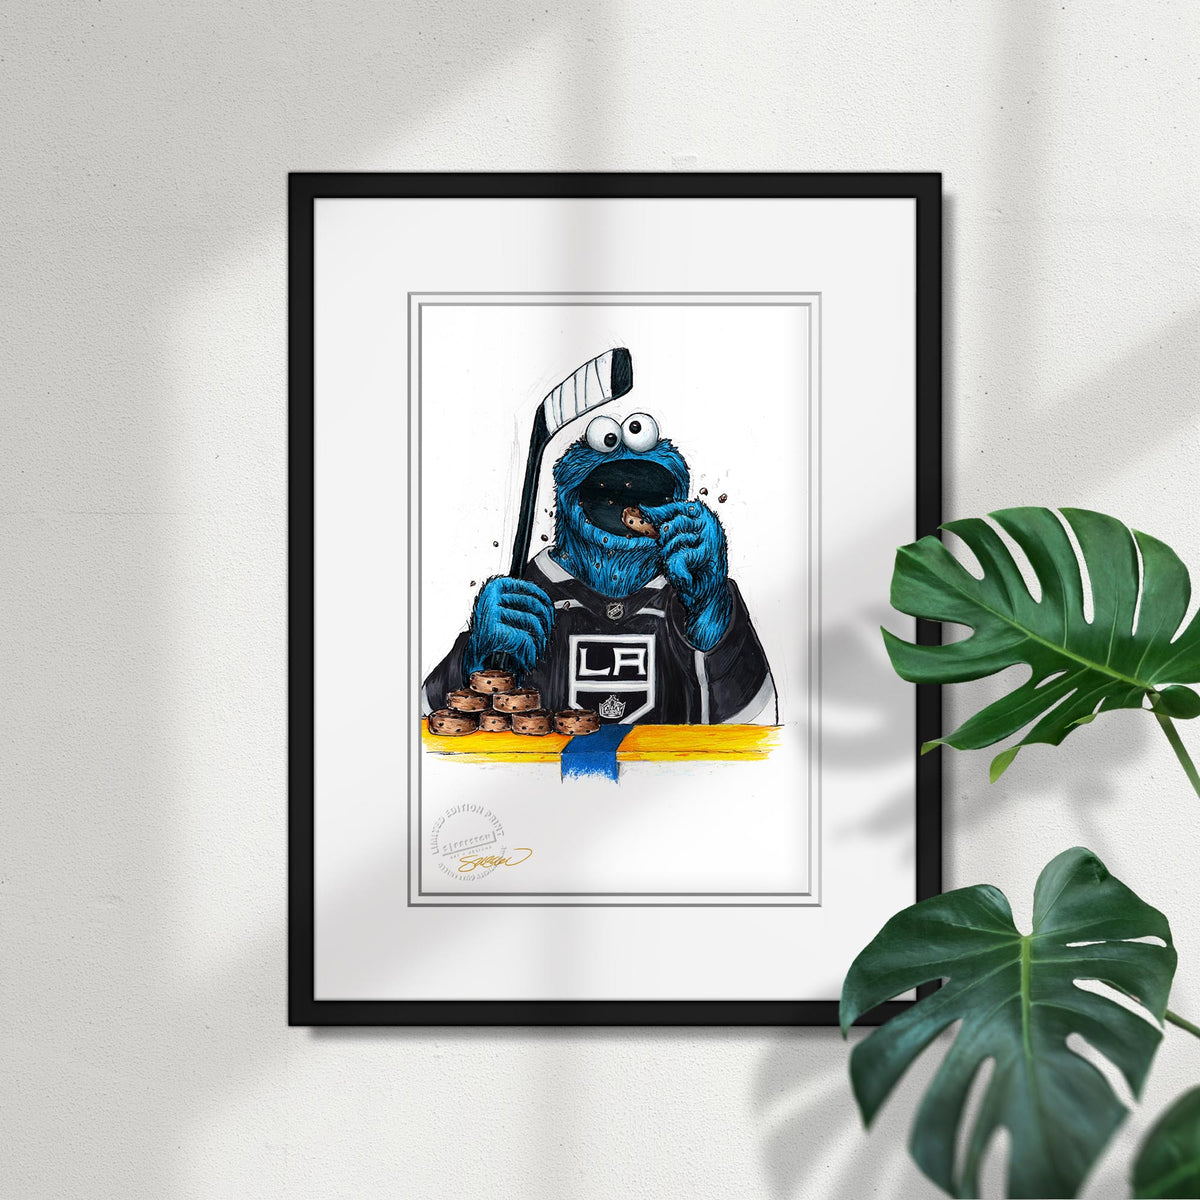 Cookie Monster x NHL Kings  Limited Edition Fine Art Print